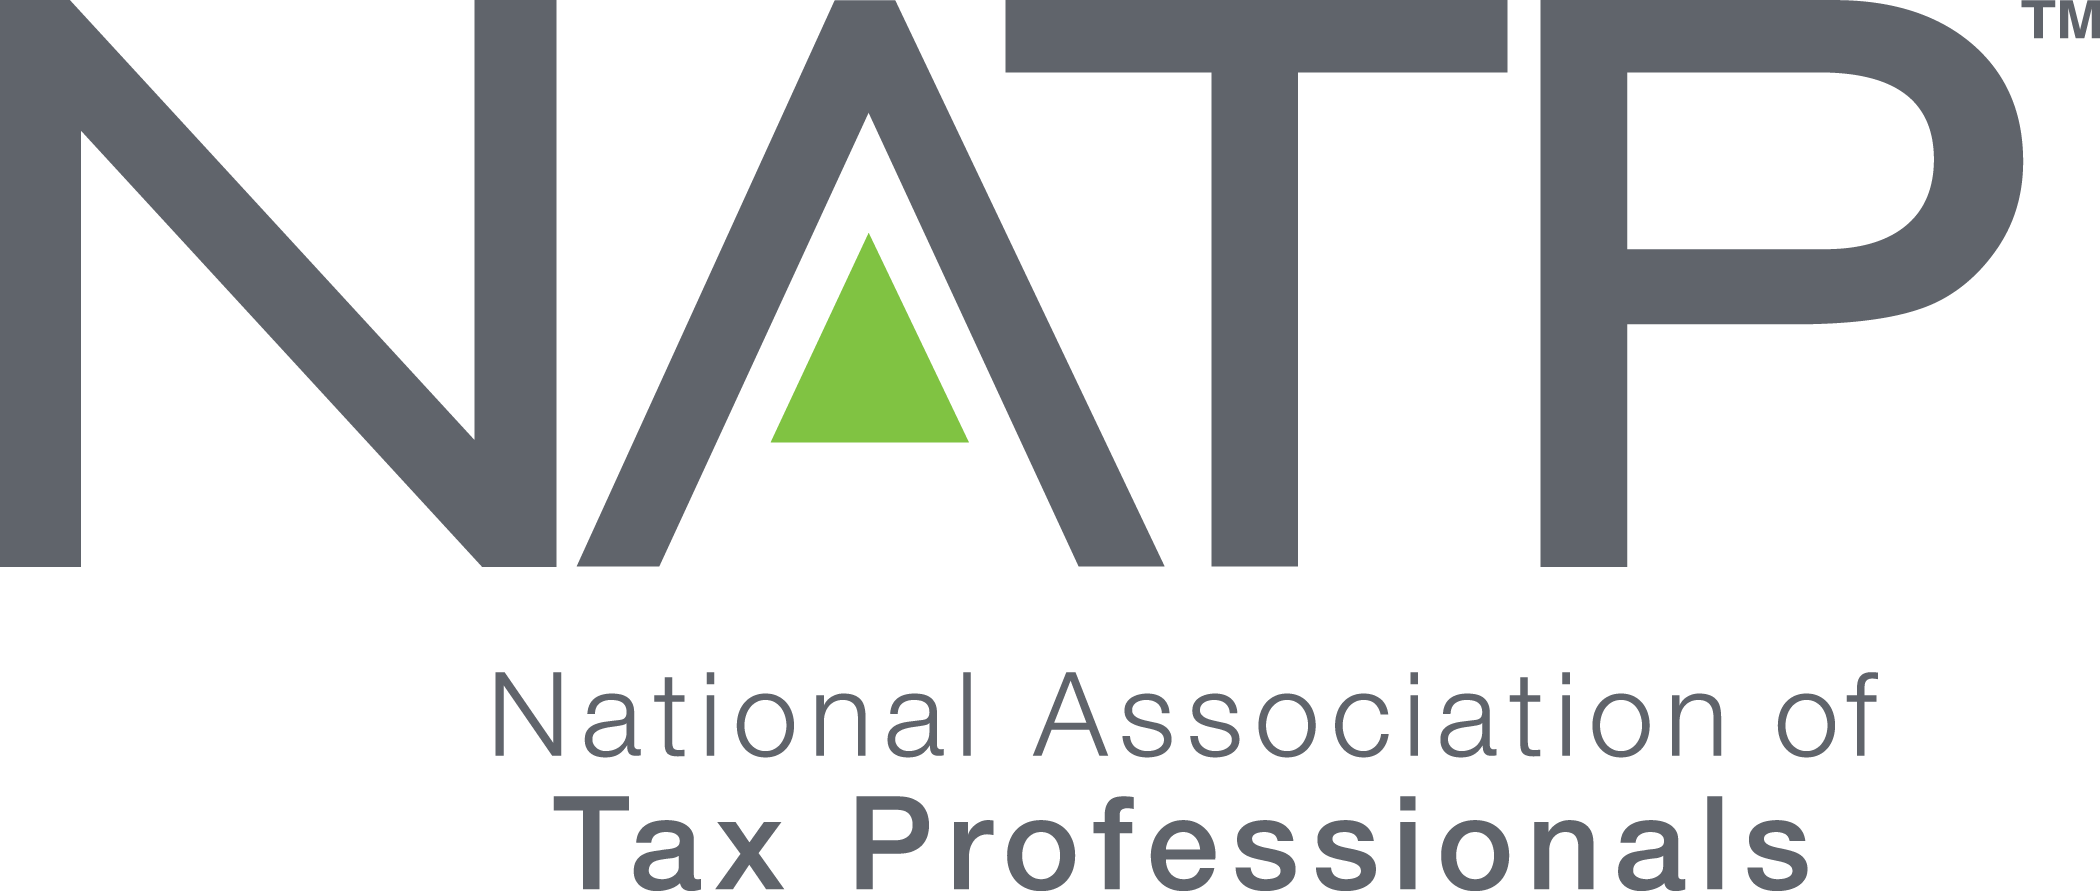 IRS’s WISP serves as ‘great starting point’ for tax firms ahead of 2023